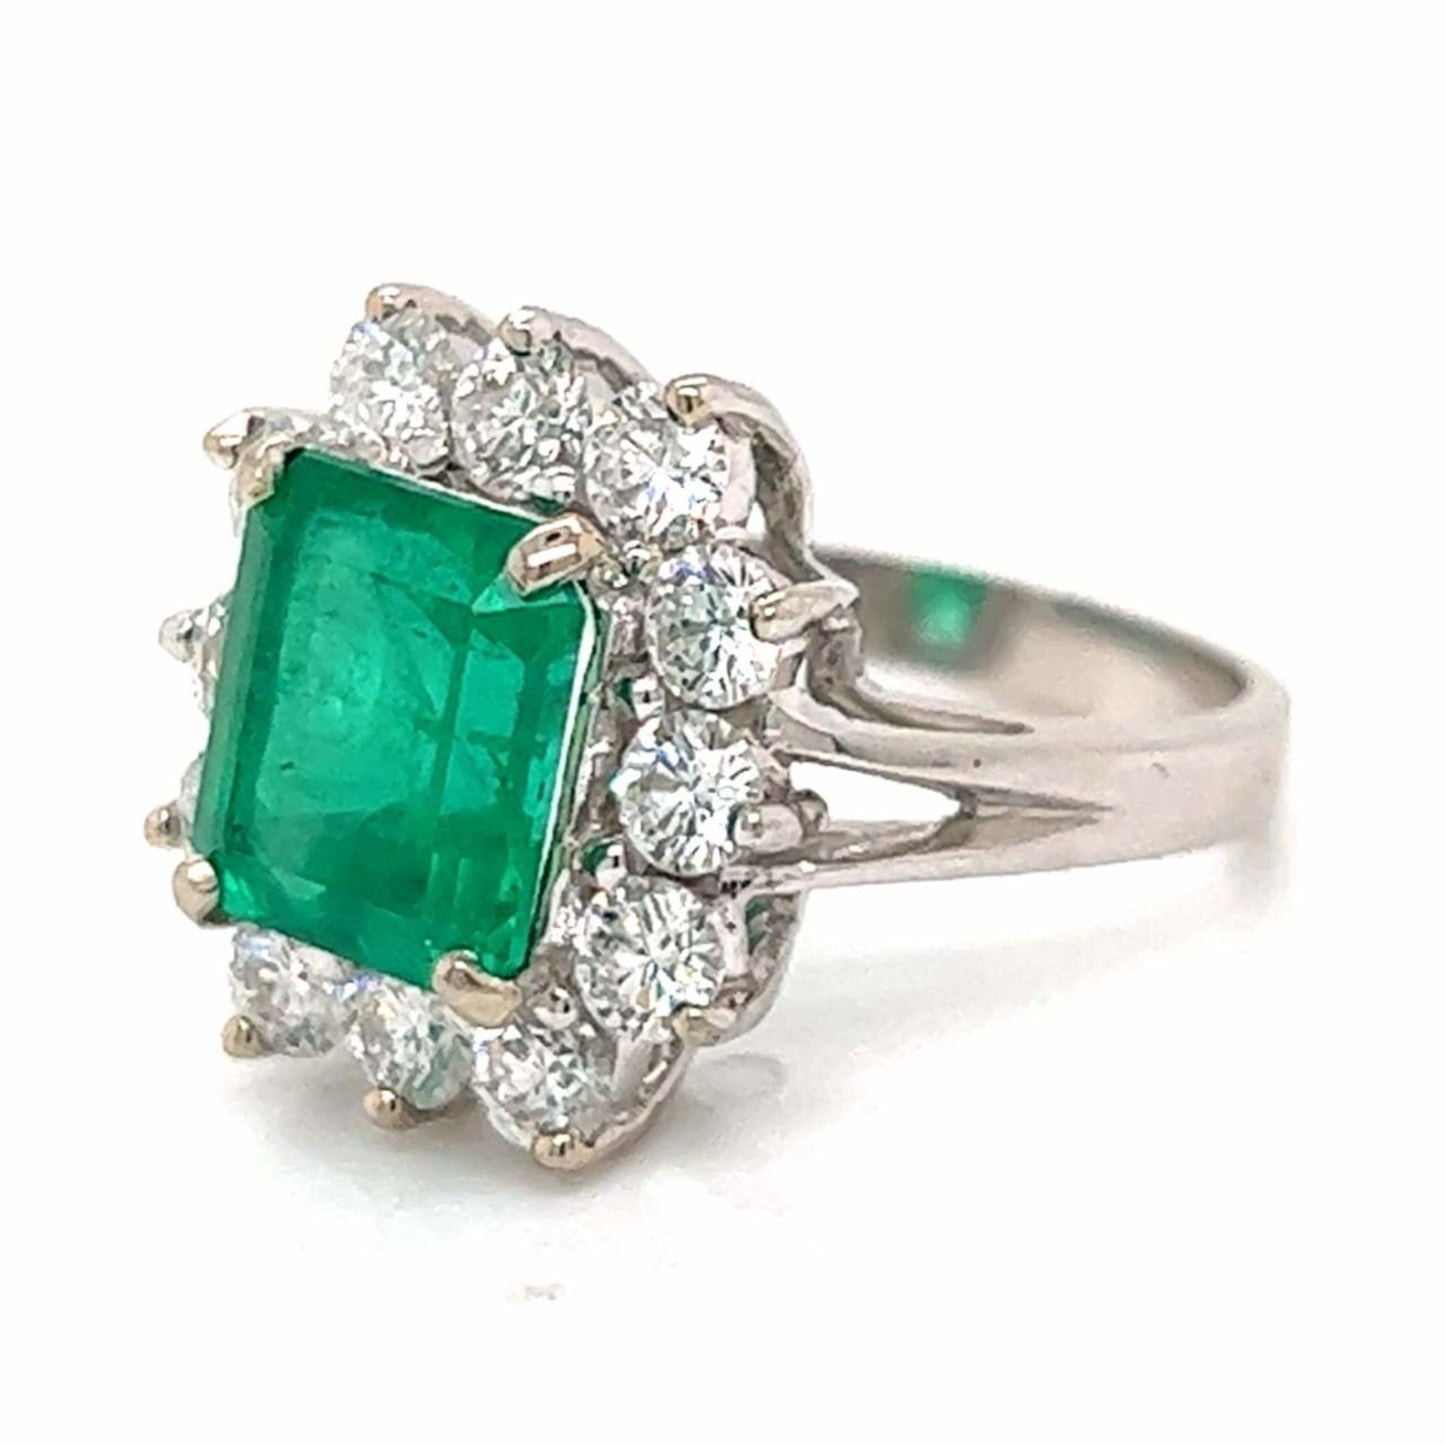 Post-1980s 14KT White Gold Emerald & Diamond Ring front side